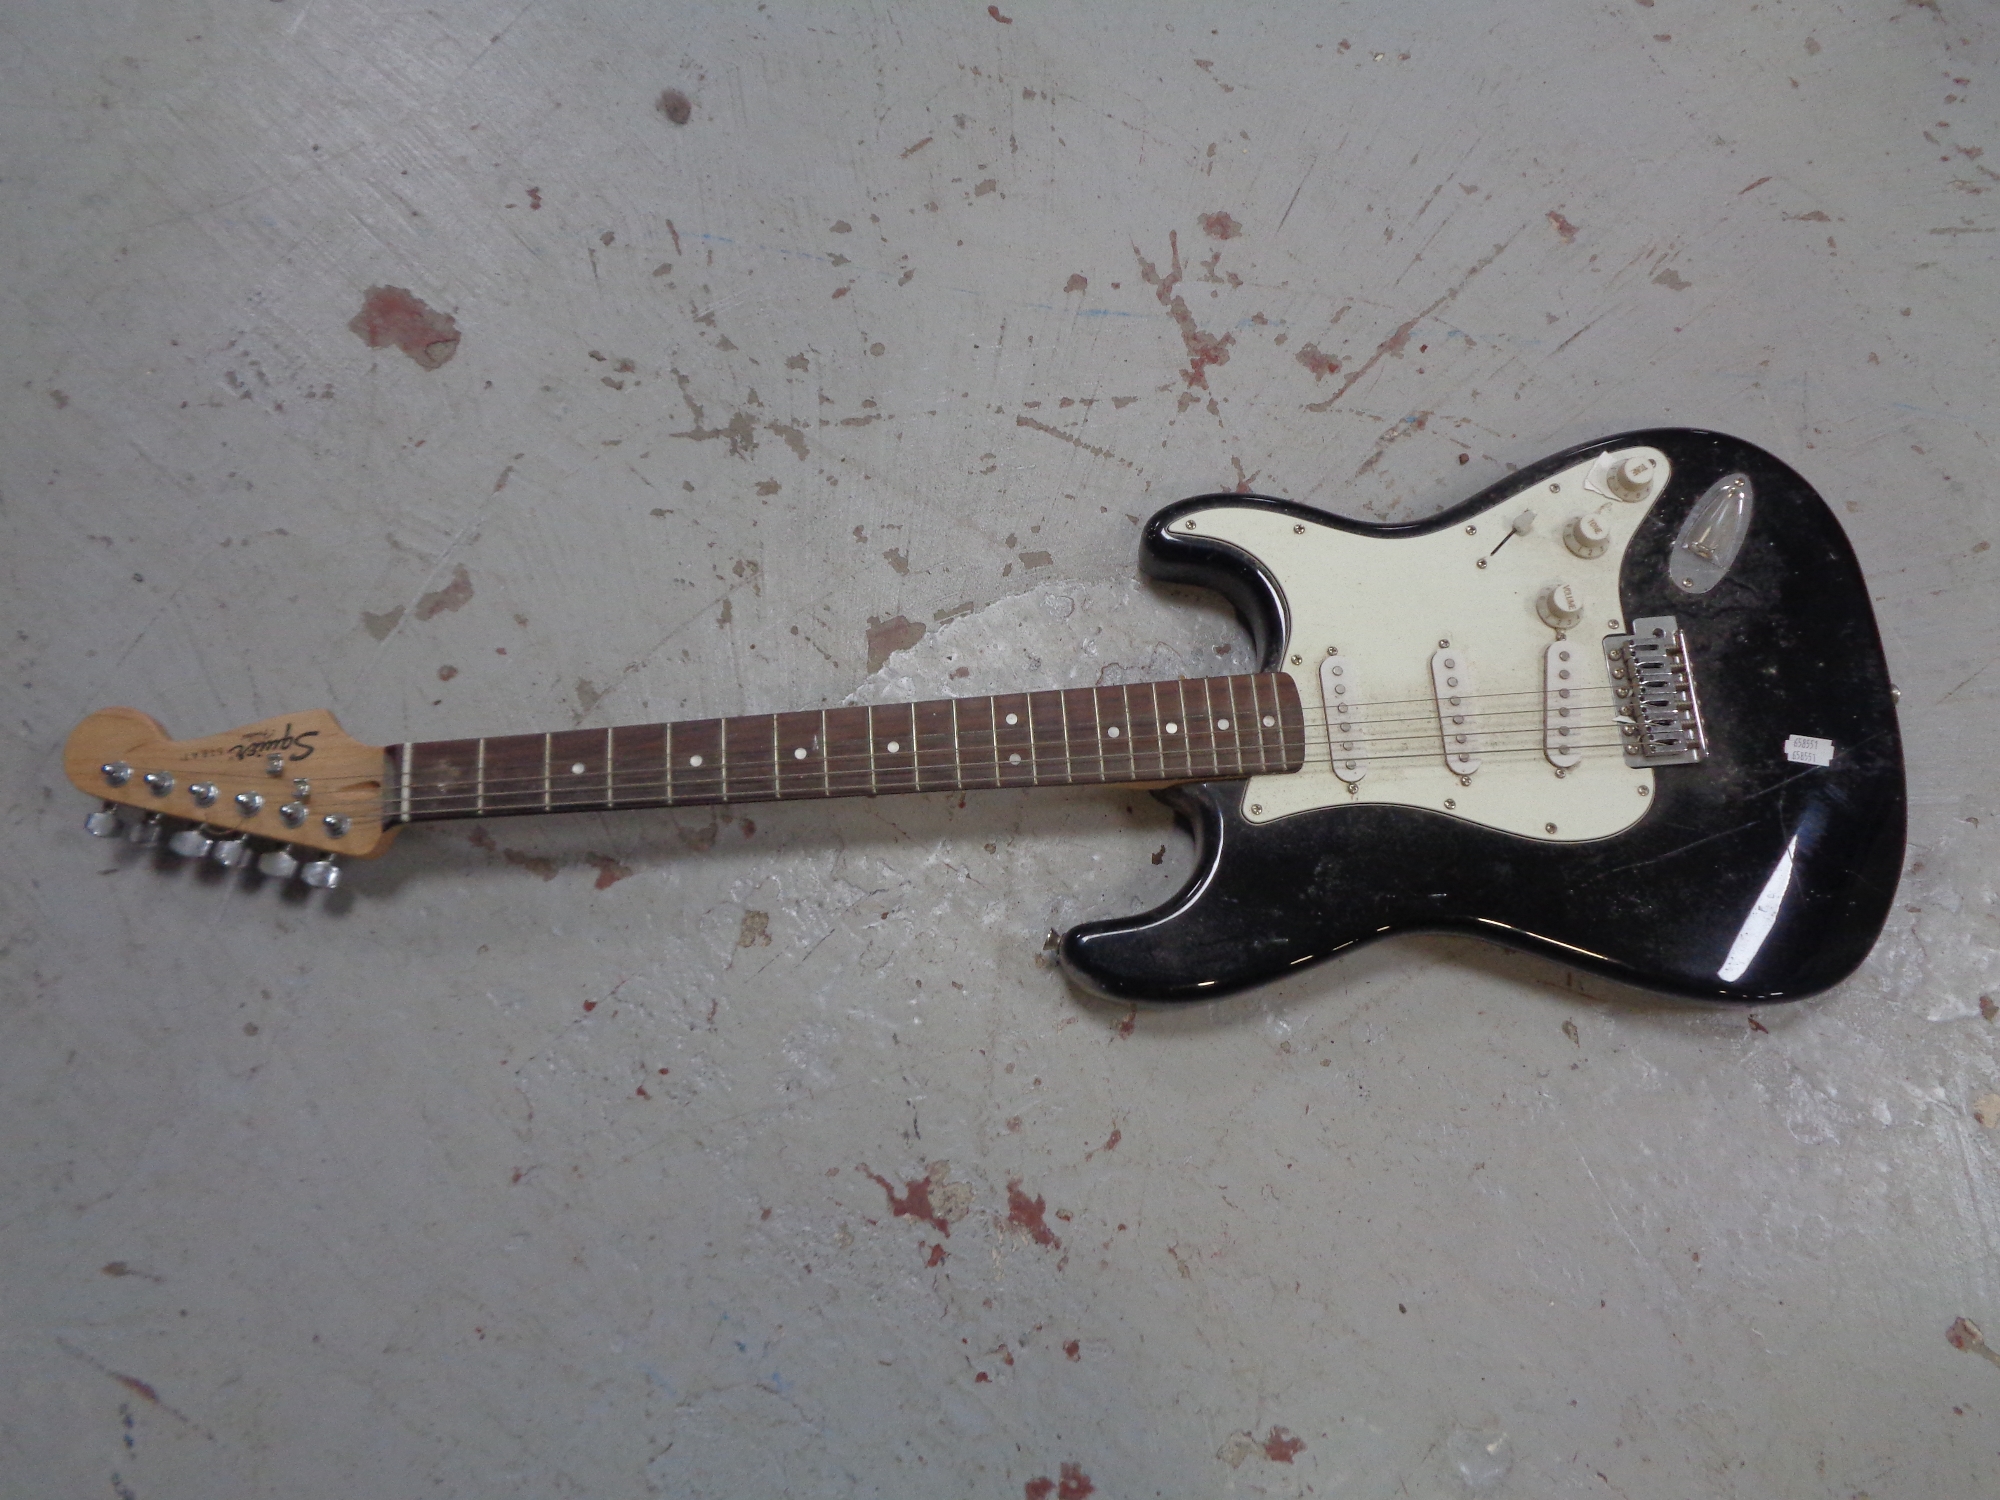 A Squier by Fender Strat electric guitar.